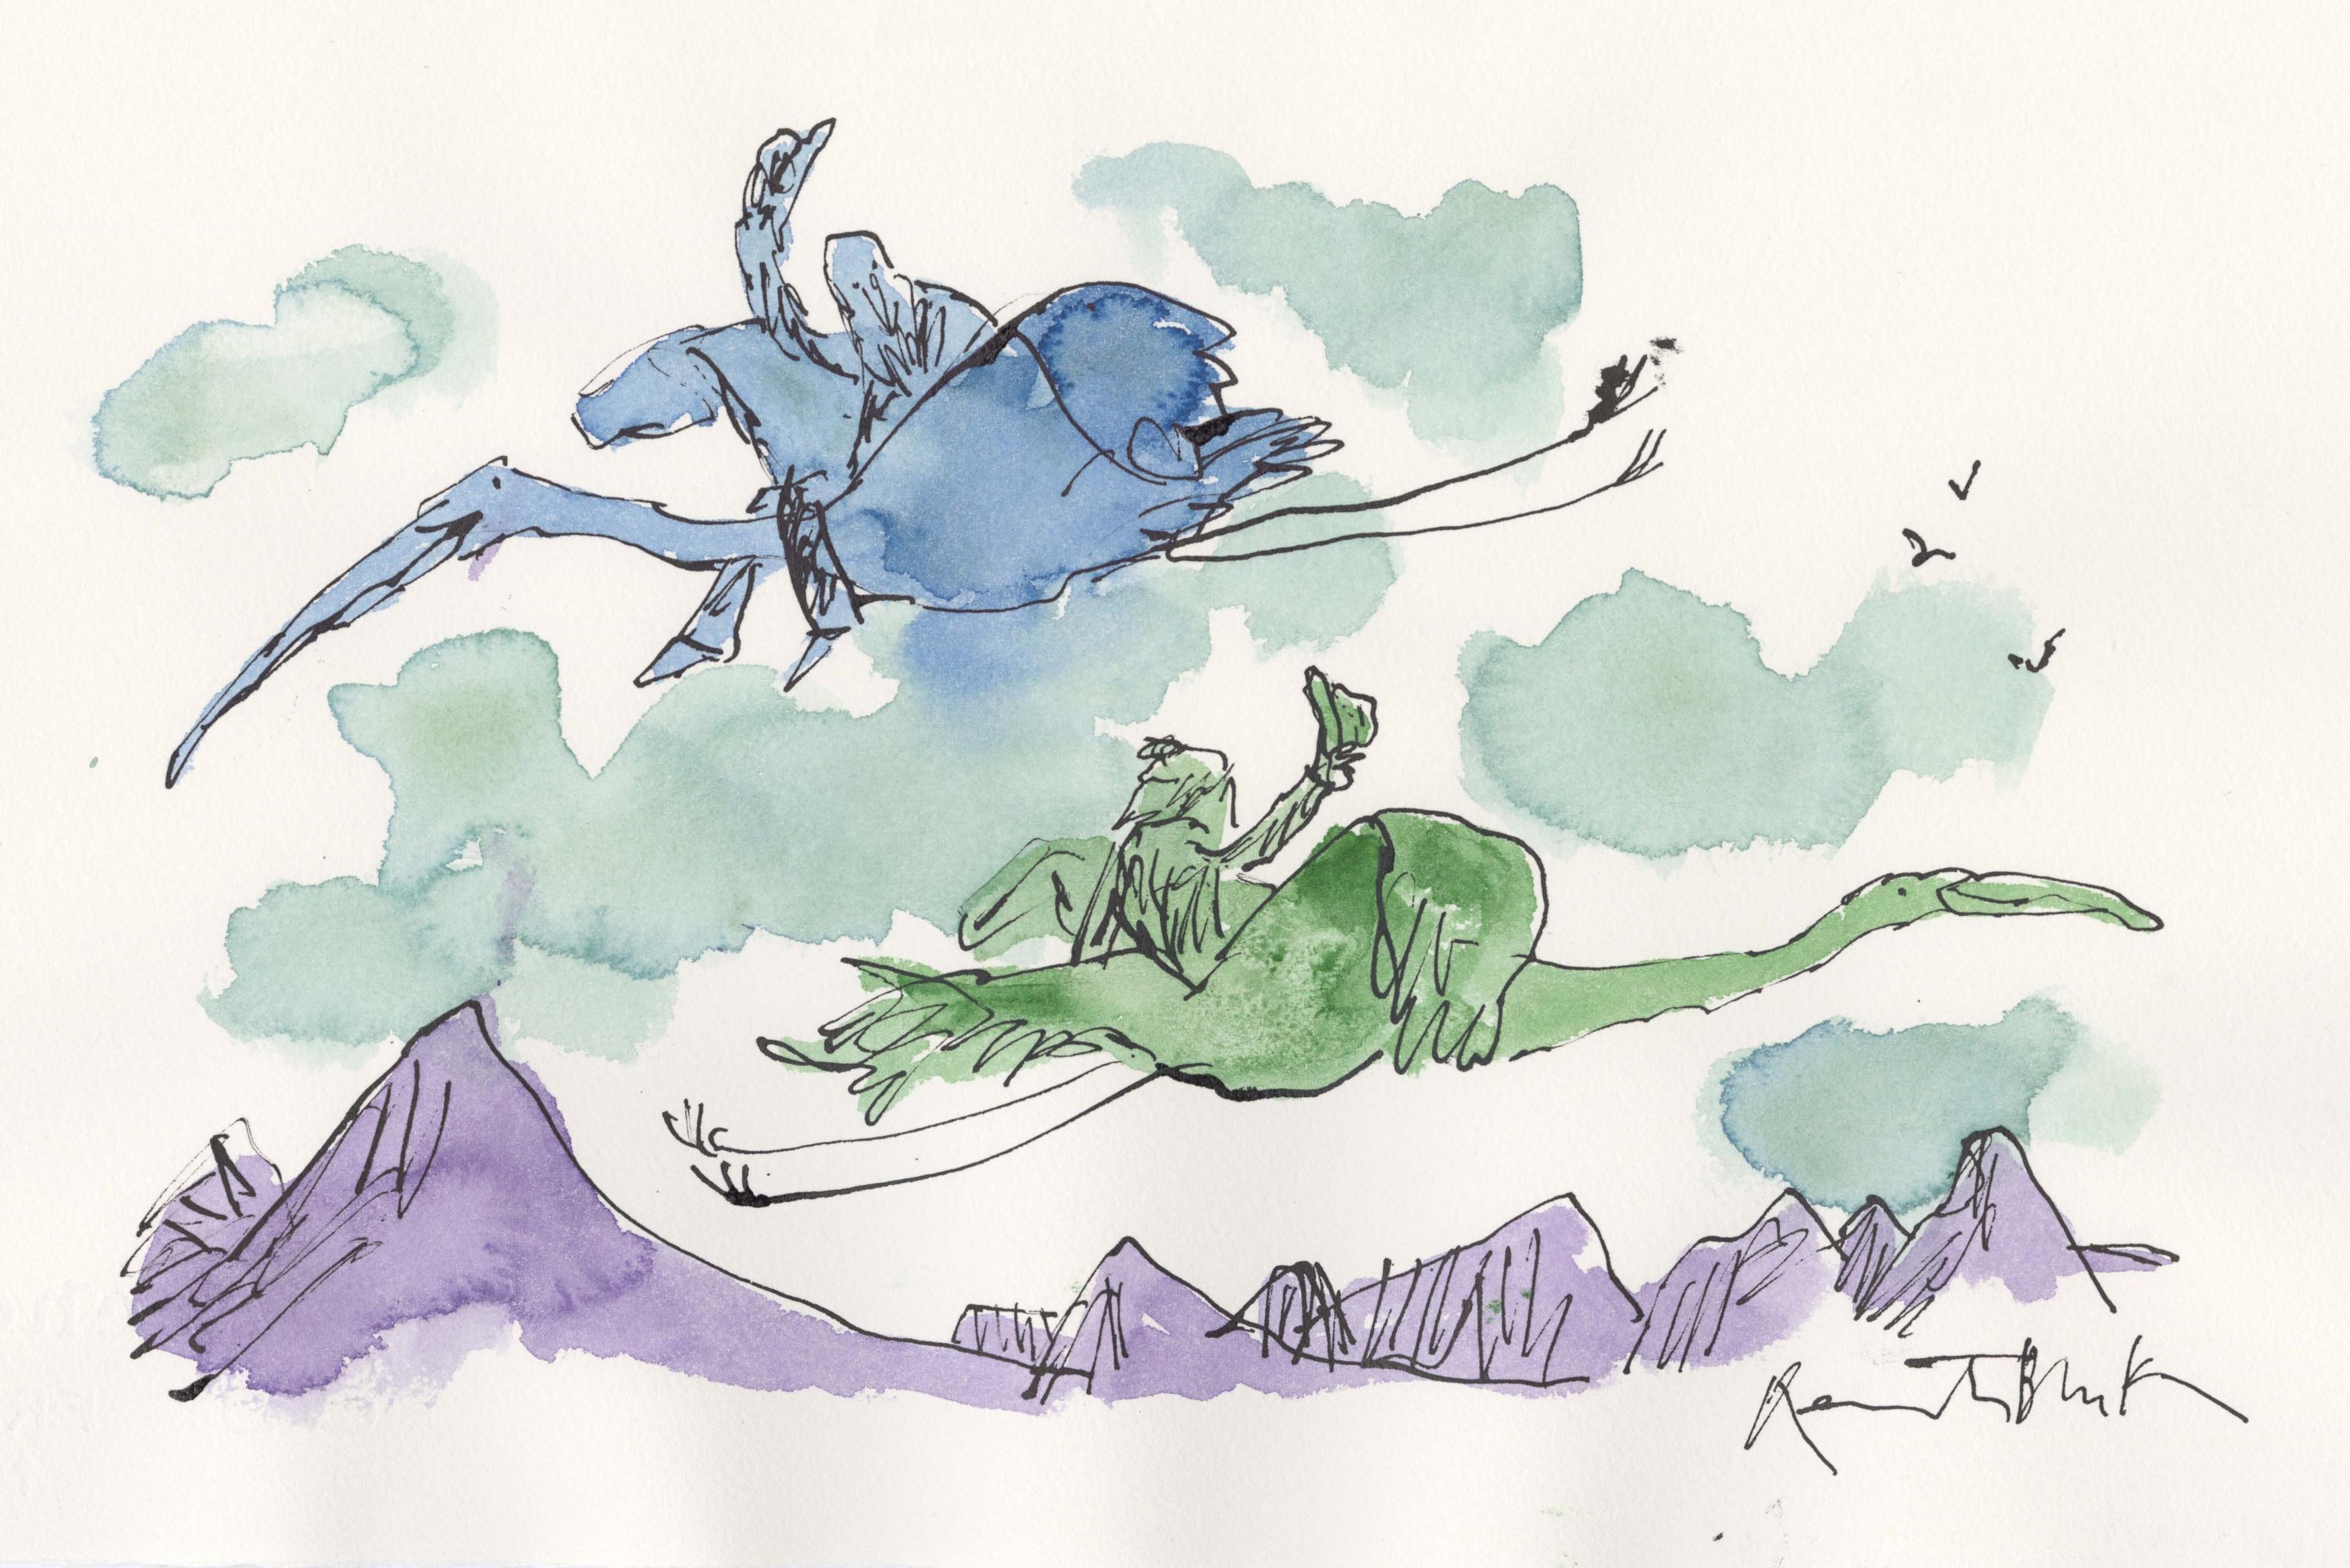 Illustration of two people riding on birds over mountains waving their hats to each other as they pass by